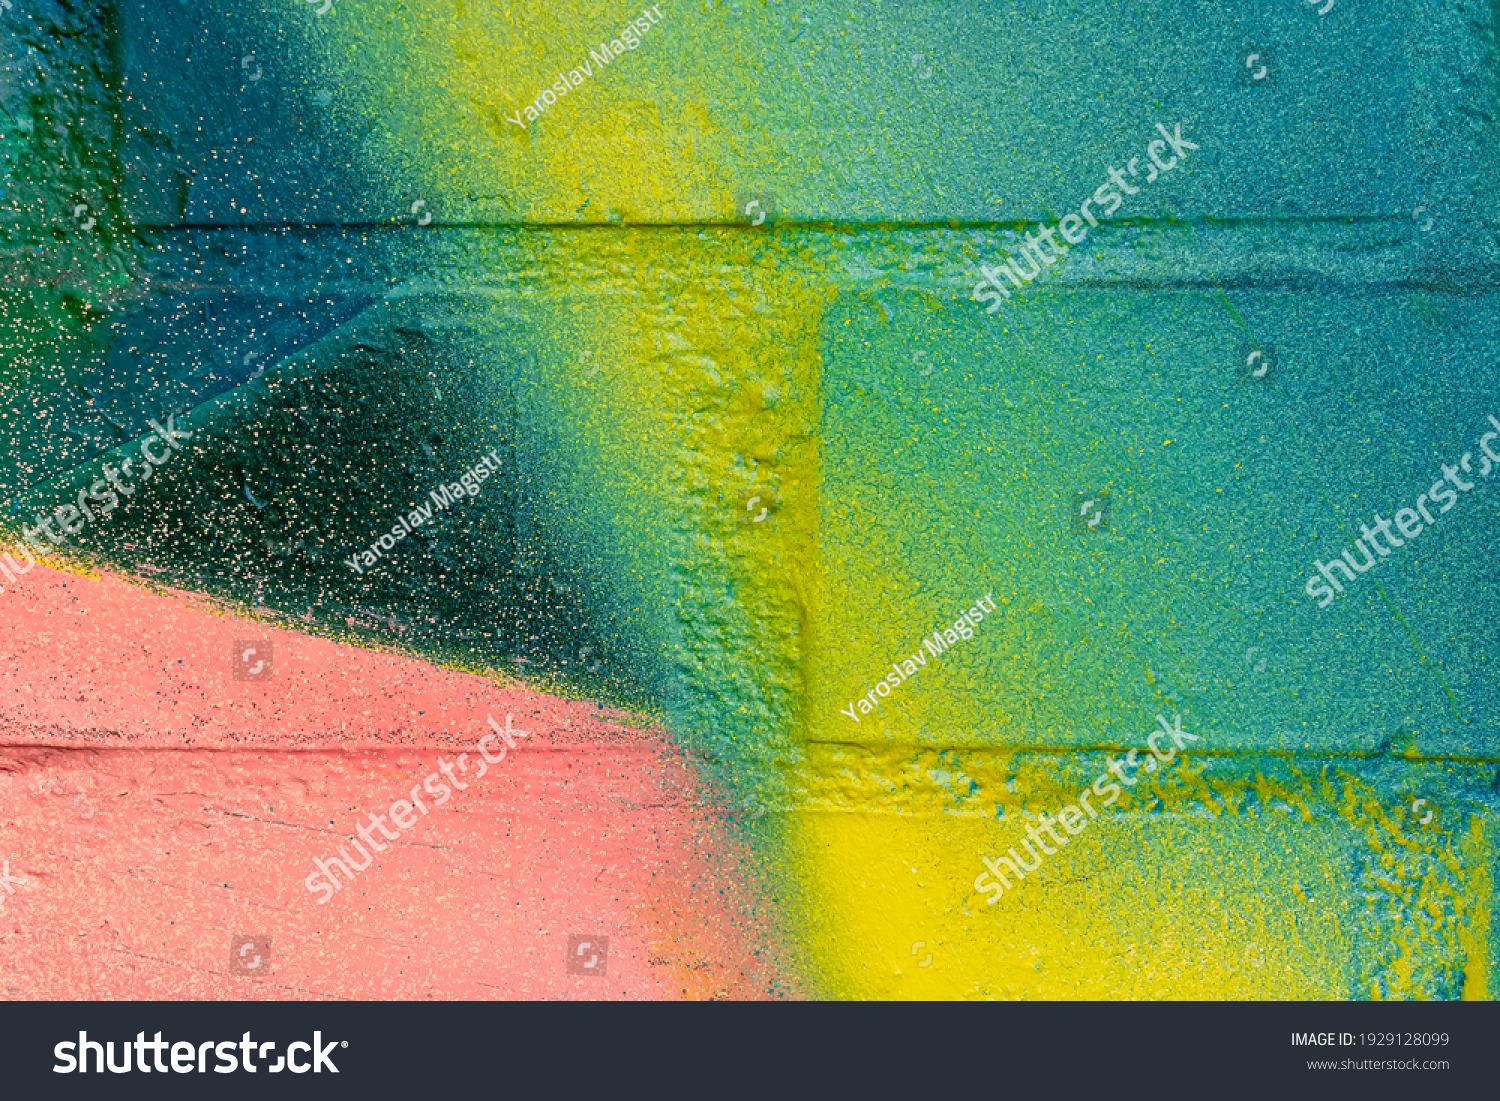 Art under ground. Beautiful street art graffiti background. The brick wall is decorated with abstract drawings house paint. Modern style urban culture of street youth. Abstract picture on wall #1929128099